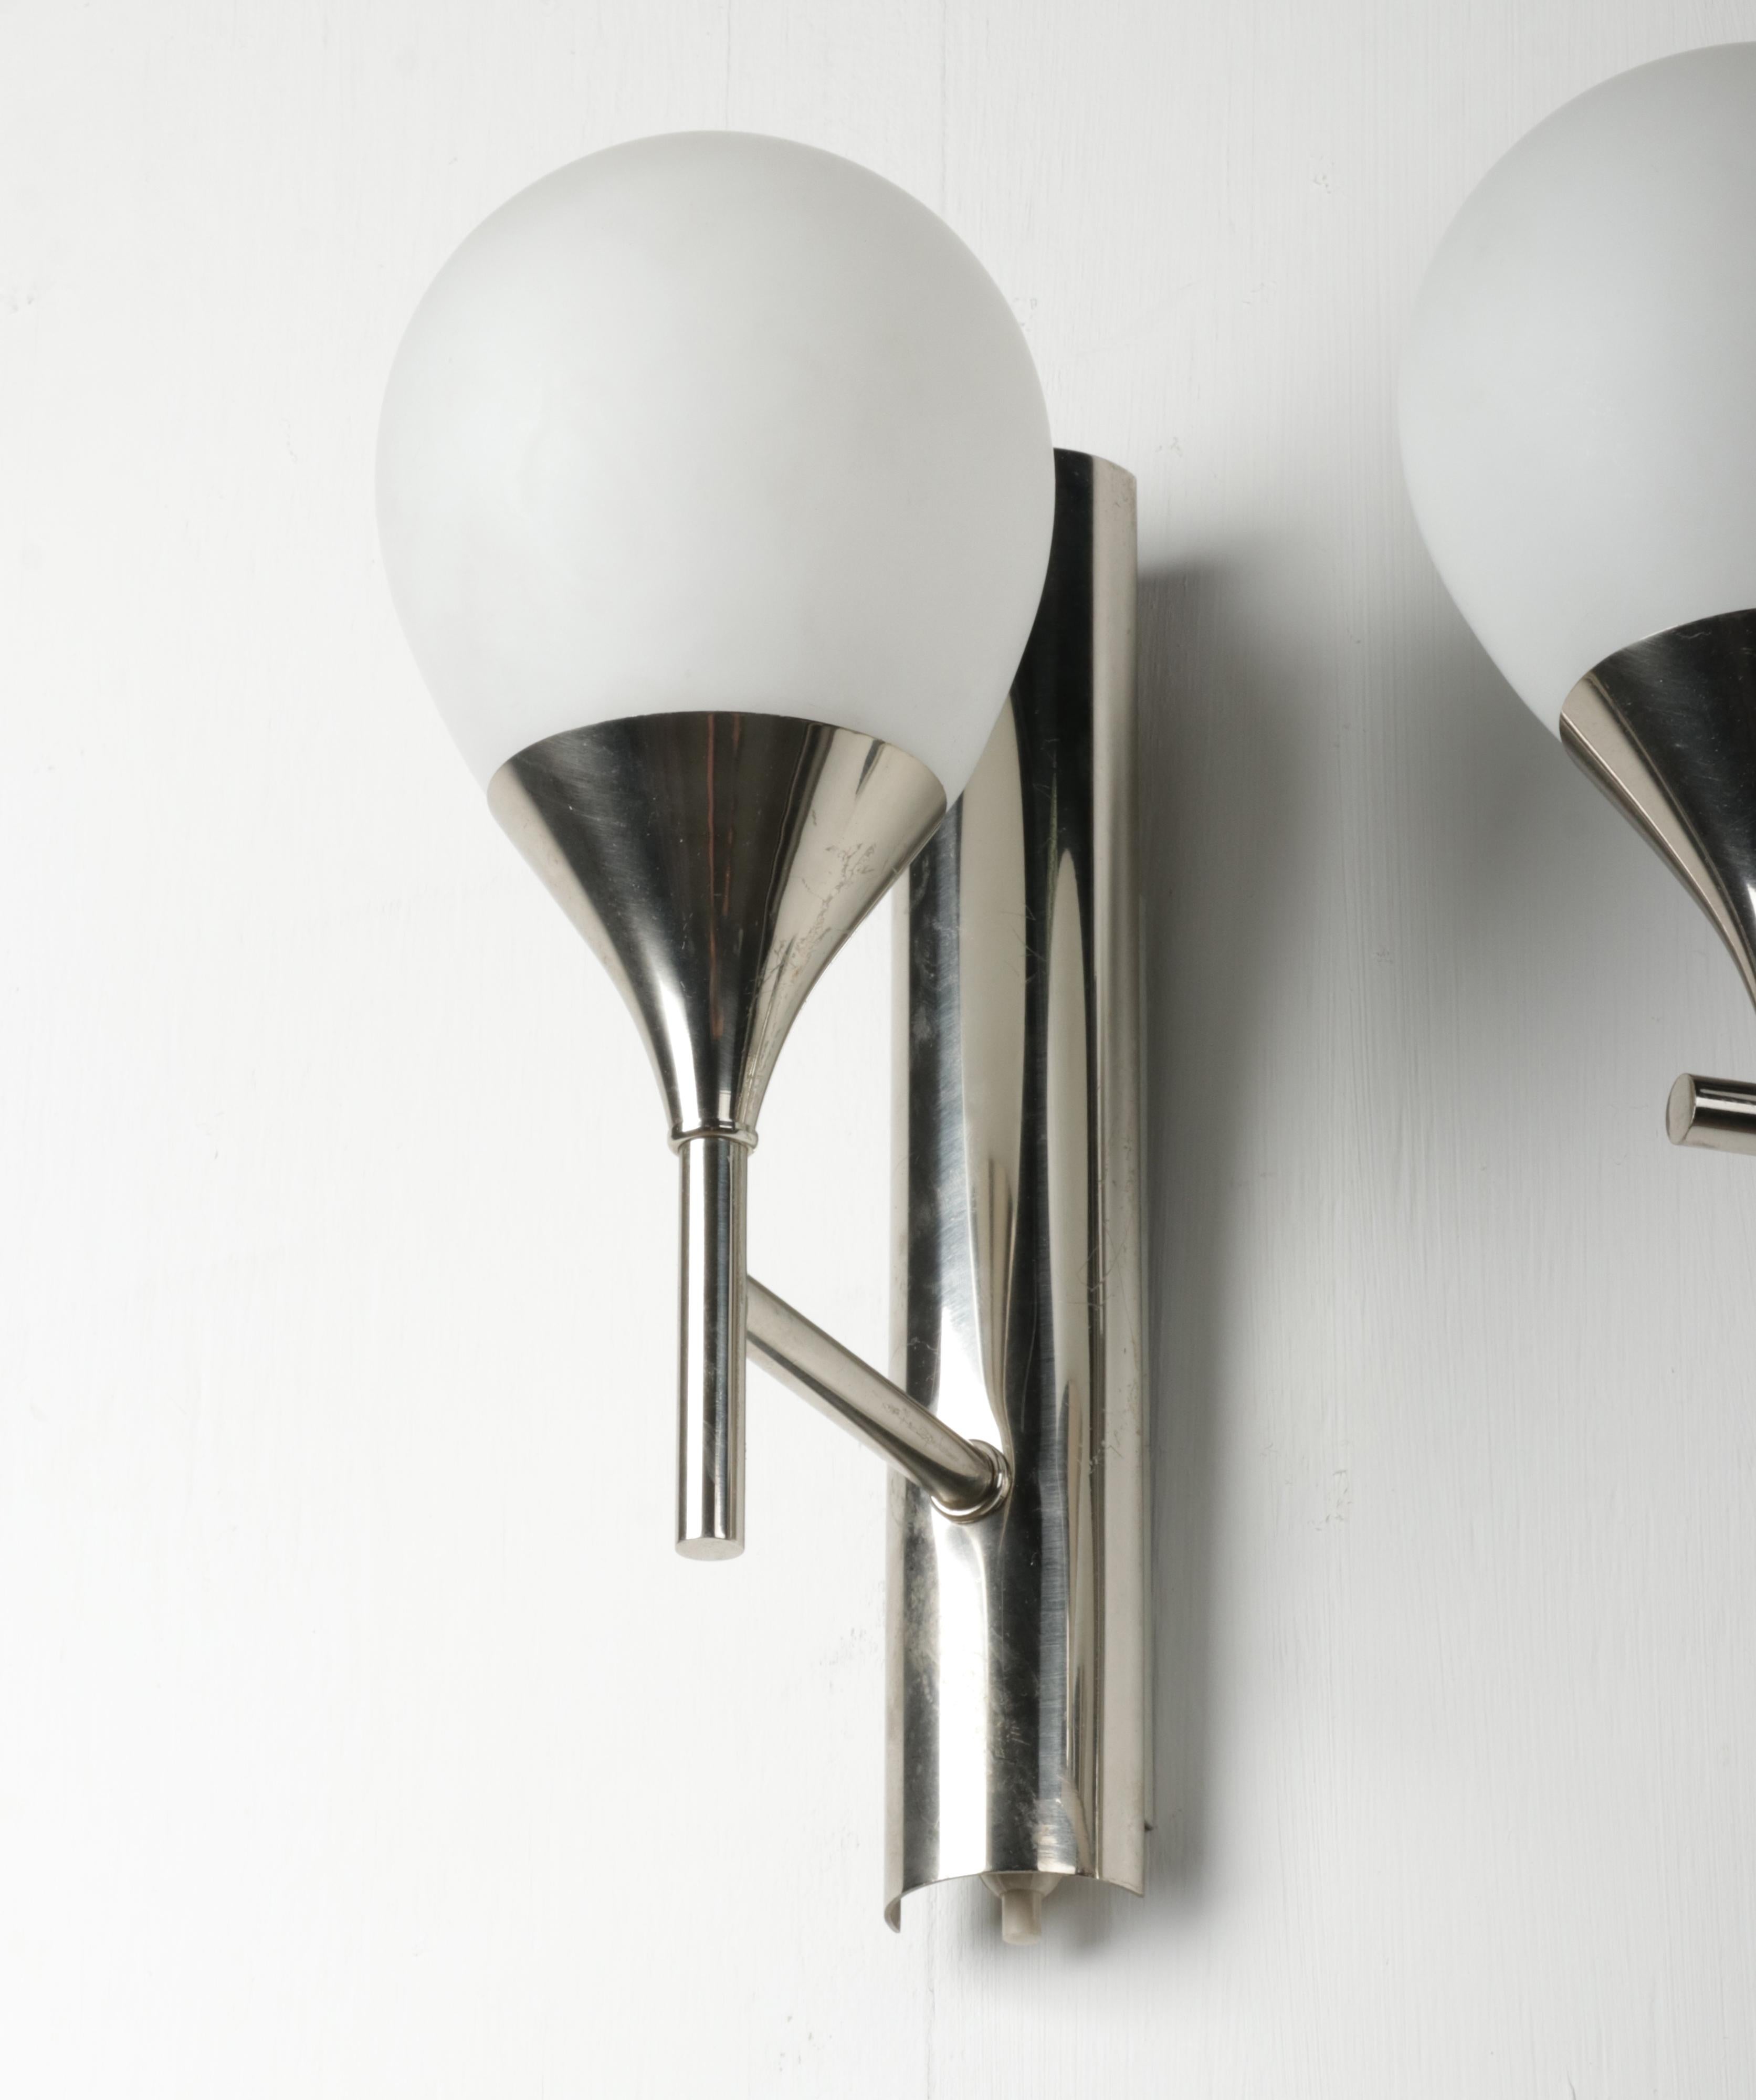 Belgian Set of Four Mid-Century Modern Chrome Plated Sconces / Wall Lights For Sale